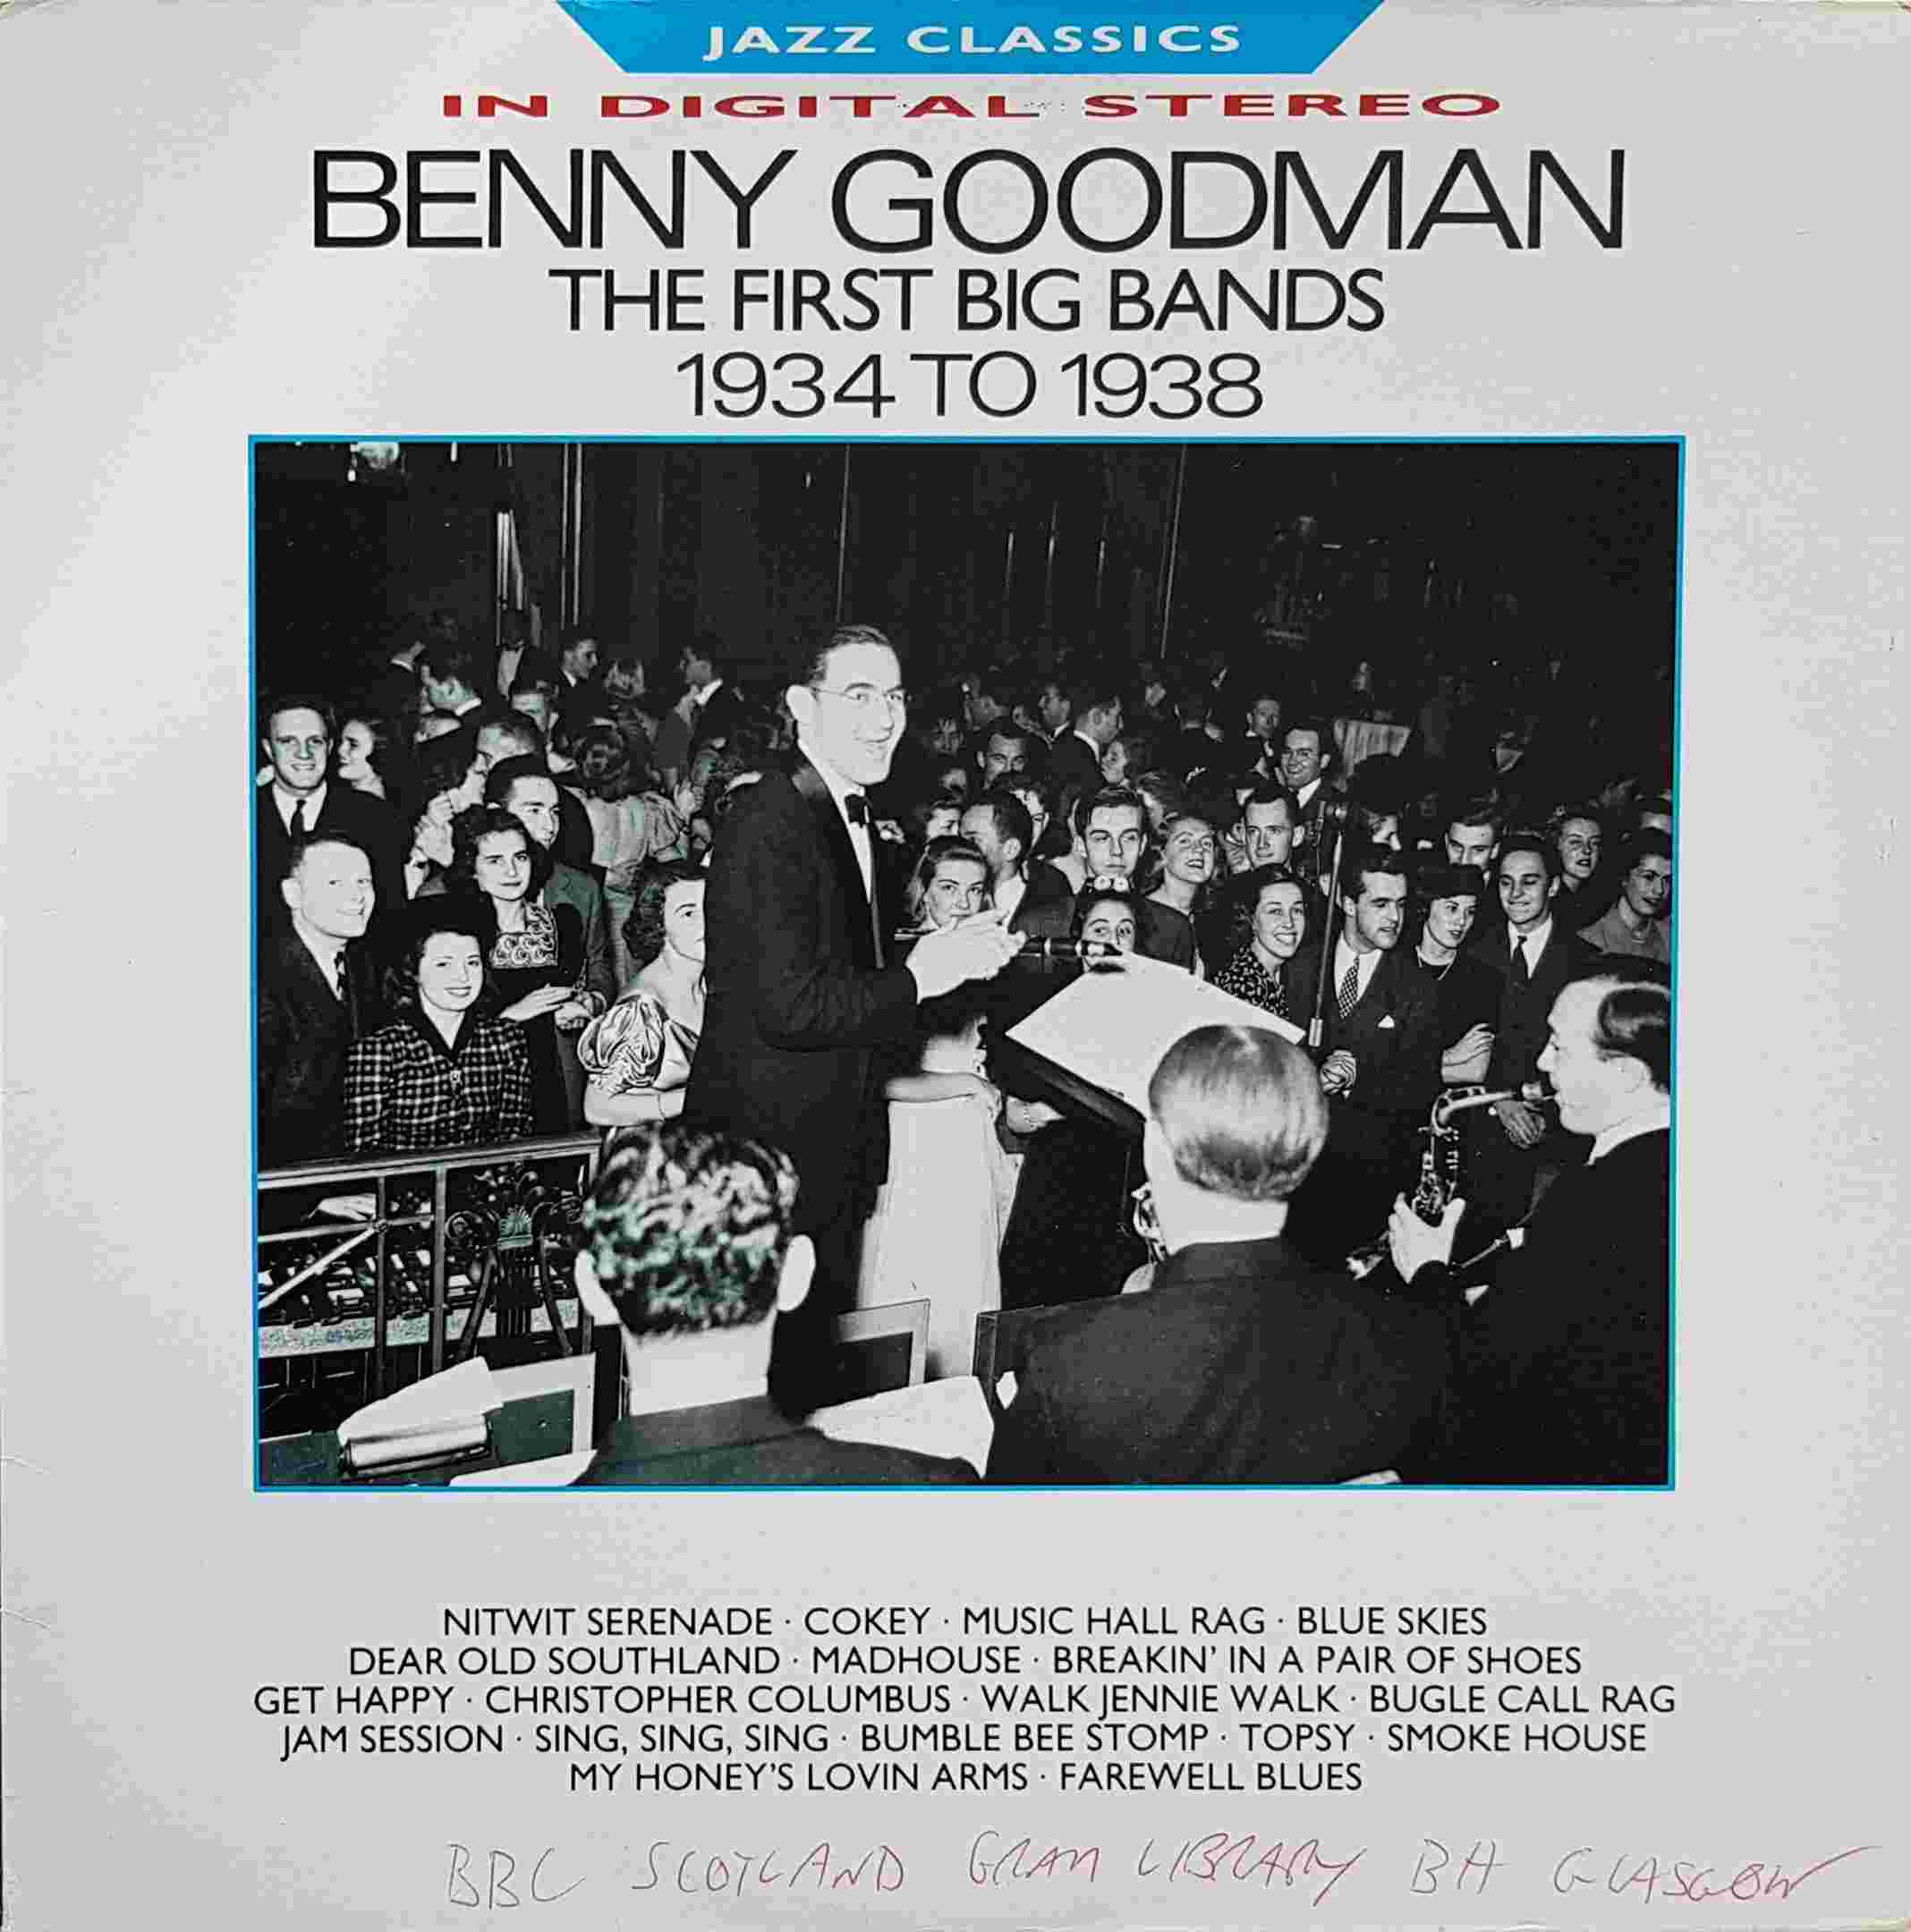 Picture of REB 759 Jazz classics - Benny Goodman 1934 - 1938 by artist Benny Goodman  from the BBC albums - Records and Tapes library